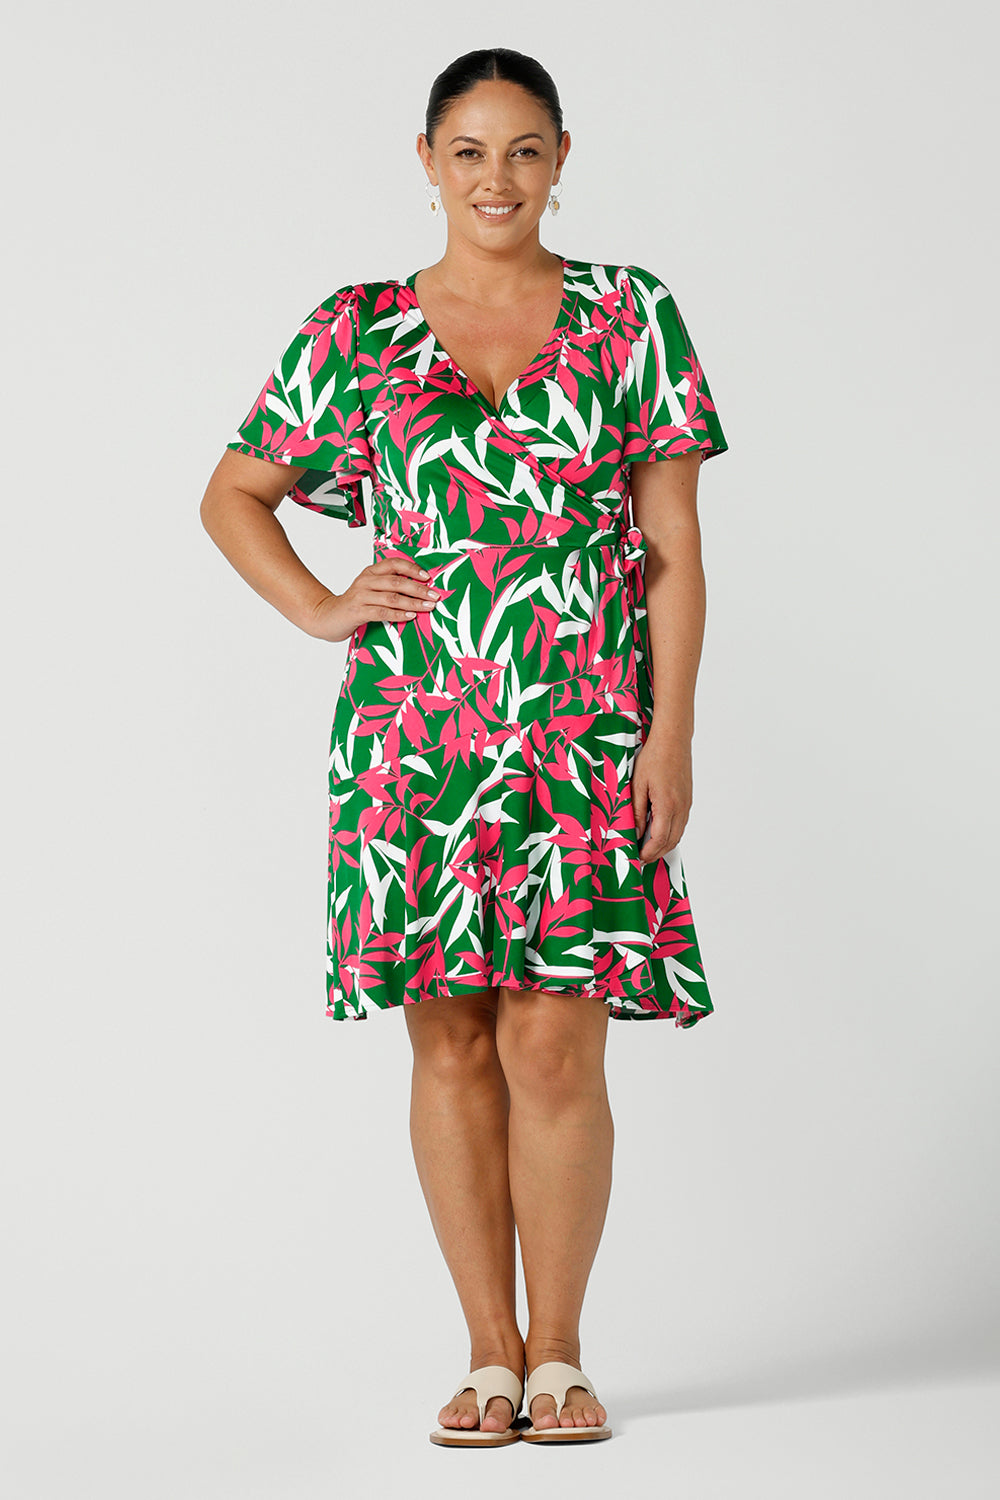 A smiley woman in a size 12 jersey dress wears the Julie Dress that is a petite height friendly wrap dress. Designed in a green base fuchsia printed leaf print. With flutter sleeves and a functioning wrap tie with a frill hem. Designed and made in Australia for women size 8 - 24.